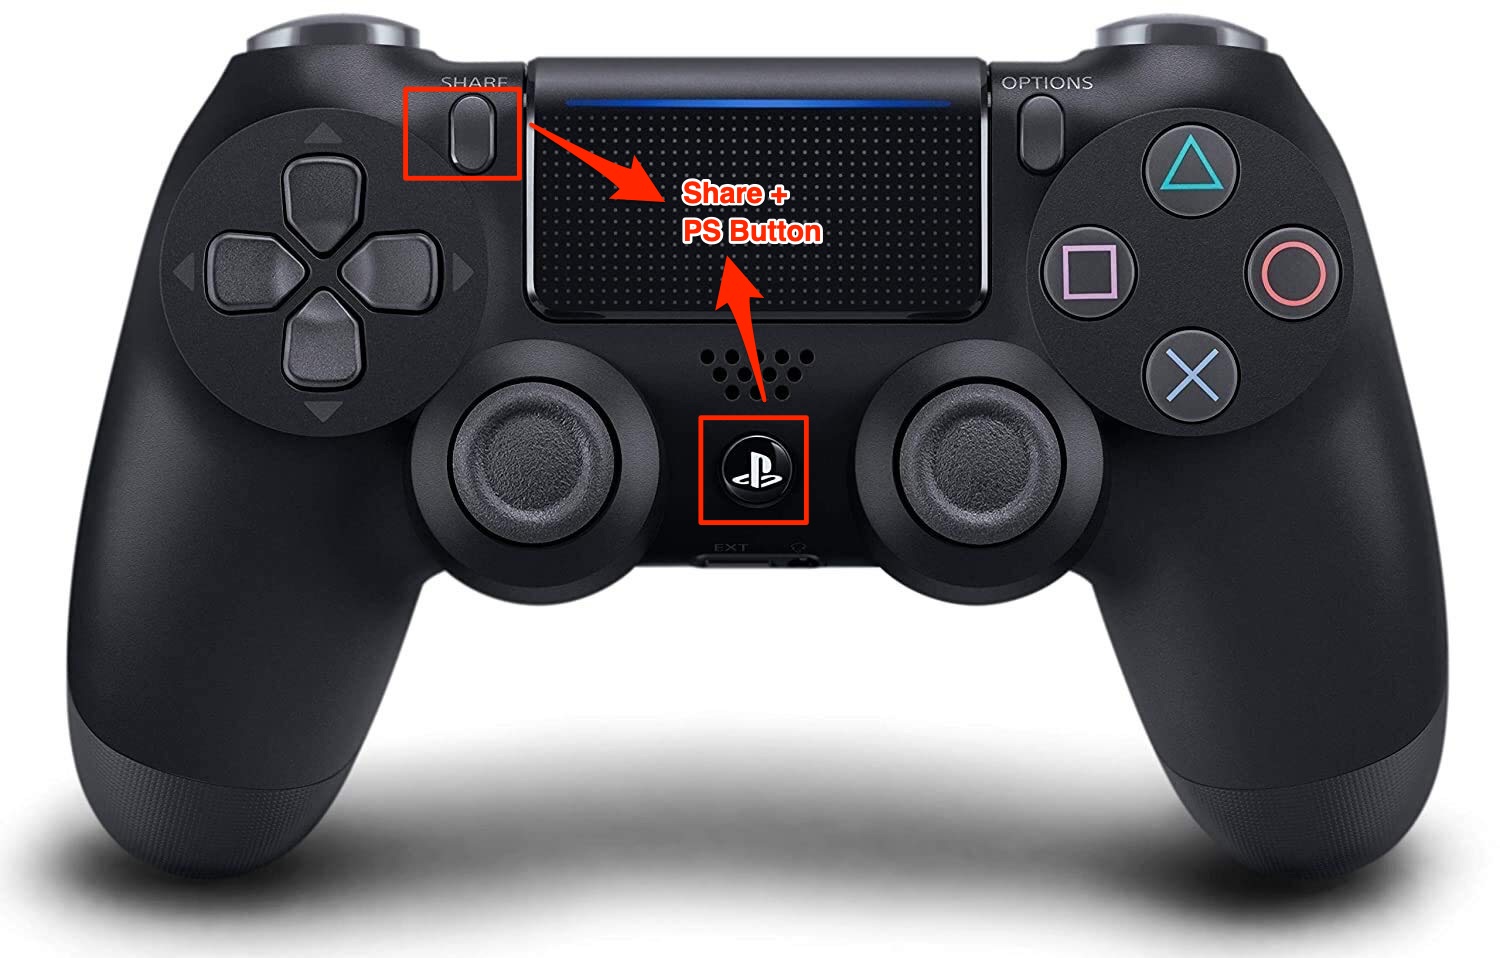 How to Connect the DualShock 4 Controller to Windows 11?